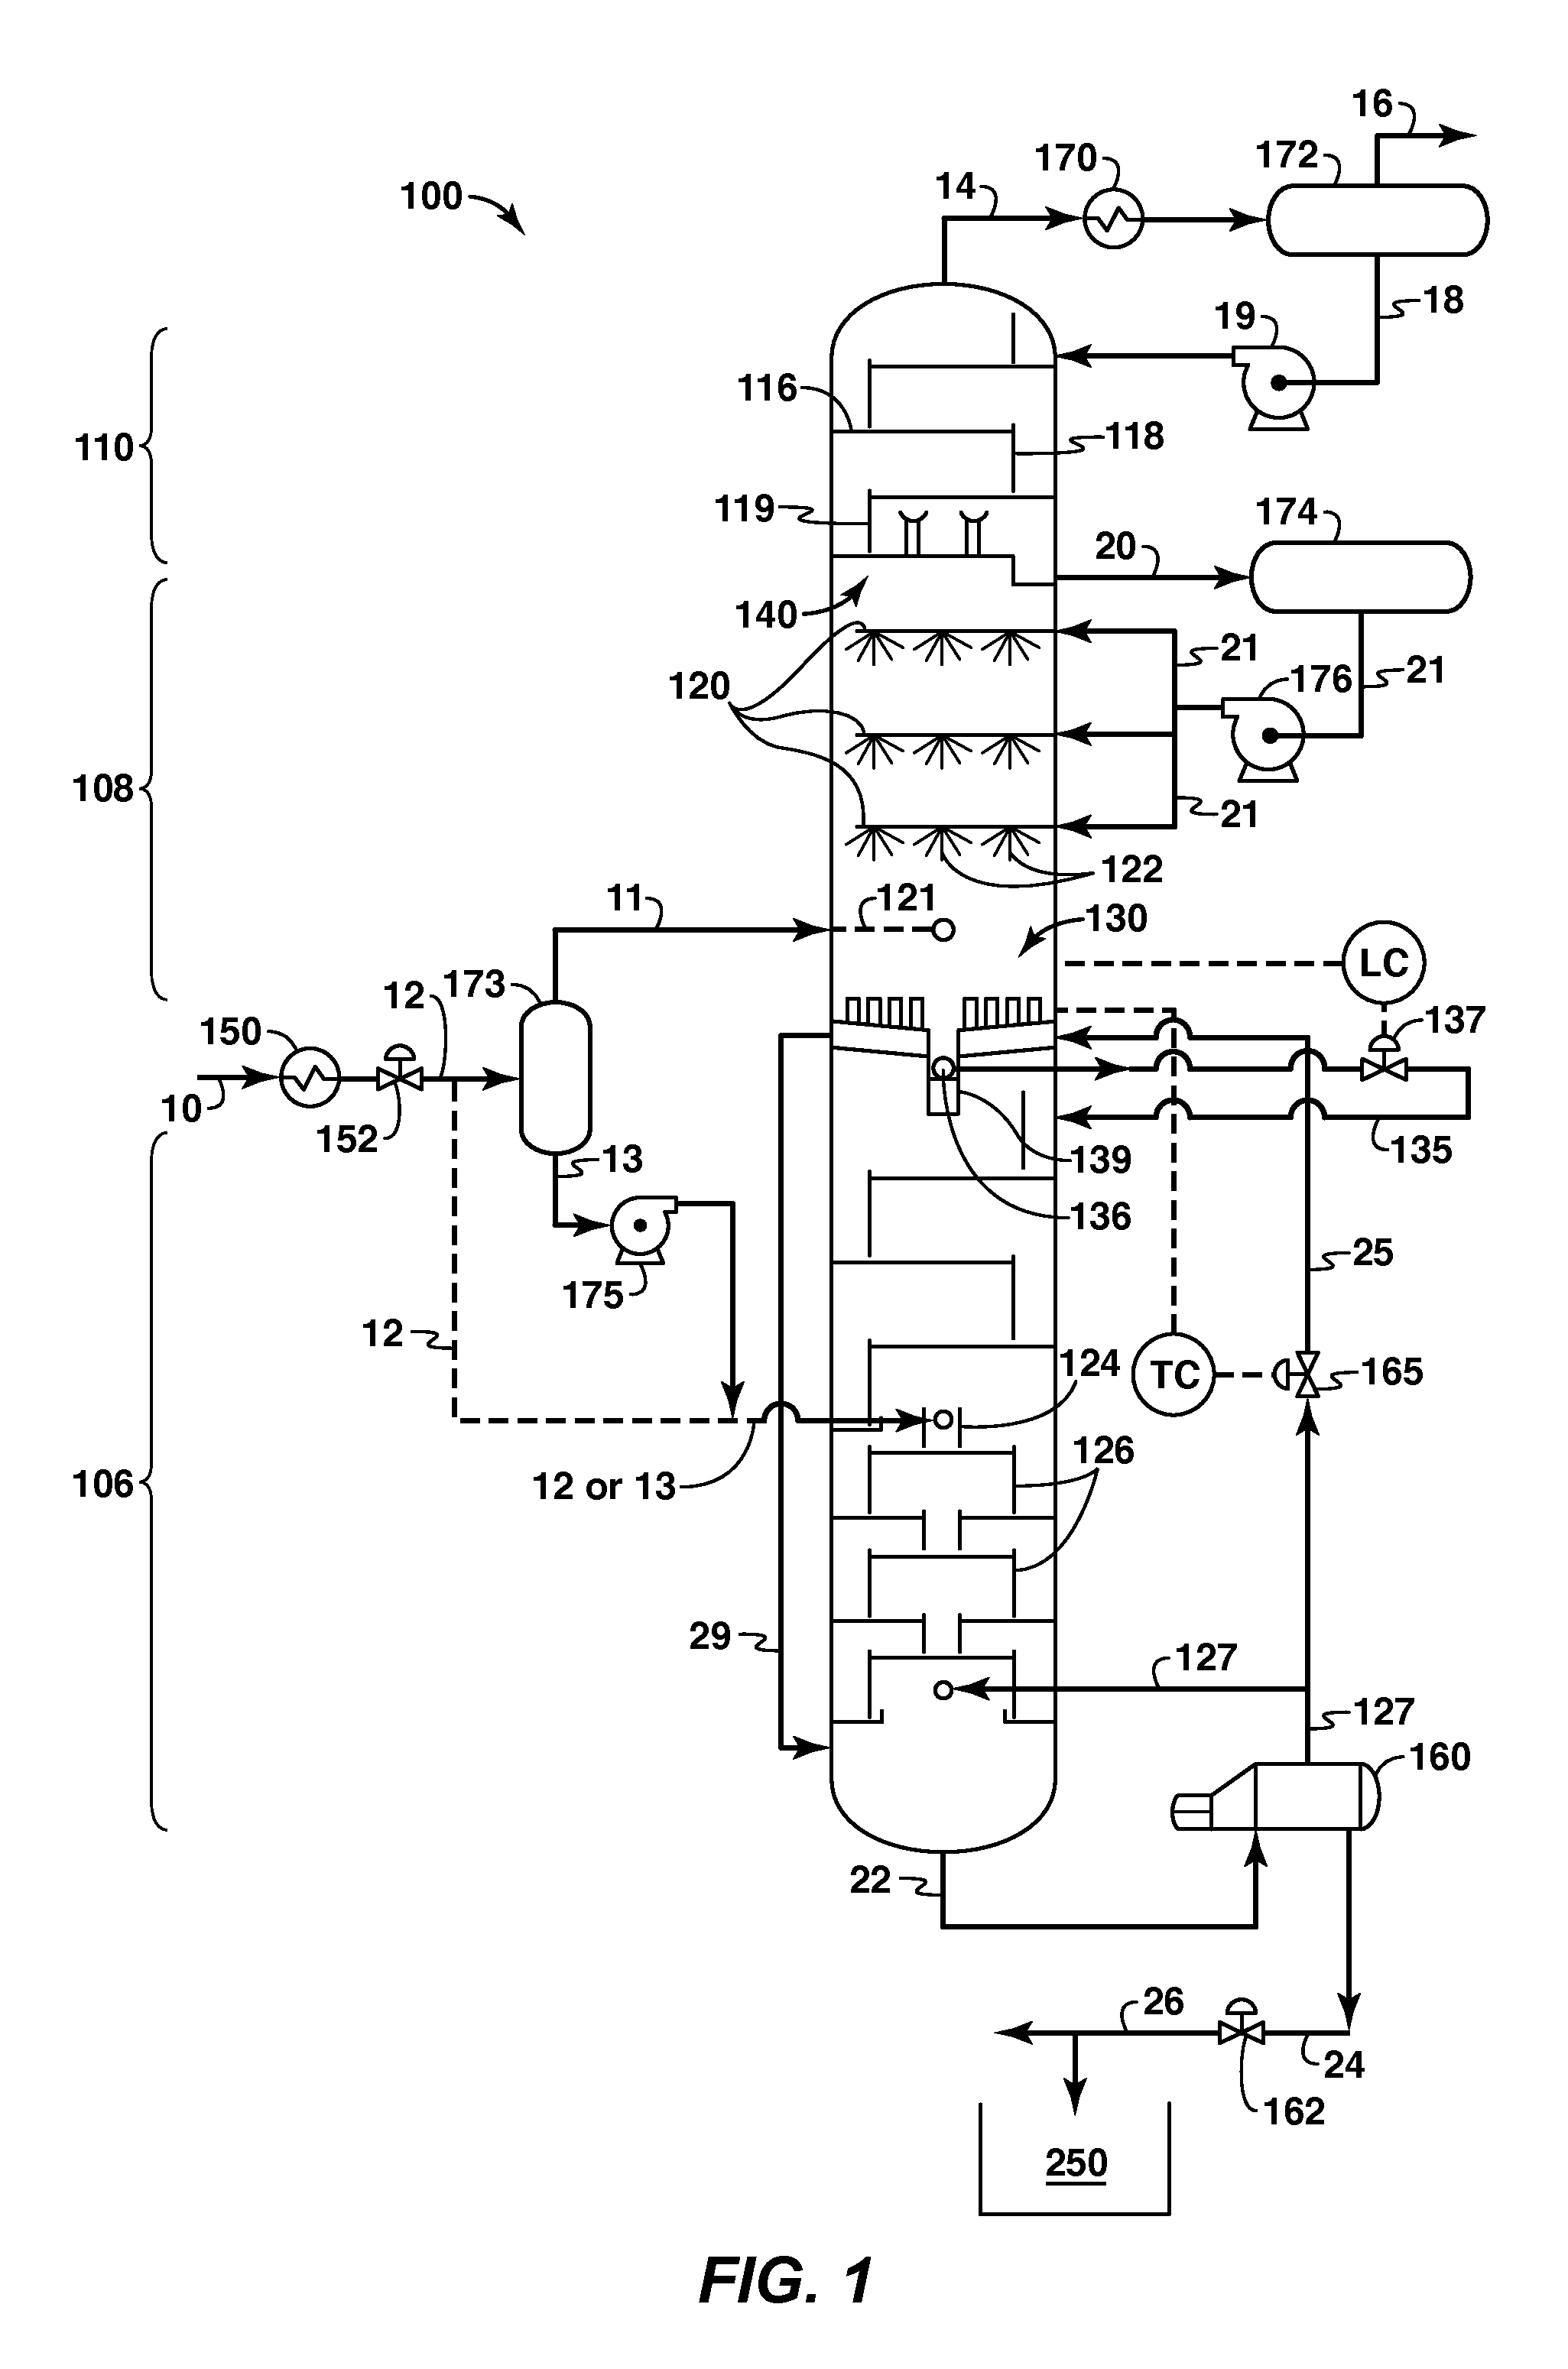 Systems and Methods for Removing Heavy Hydrocarbons and Acid Gases From a Hydrocarbon Gas Stream